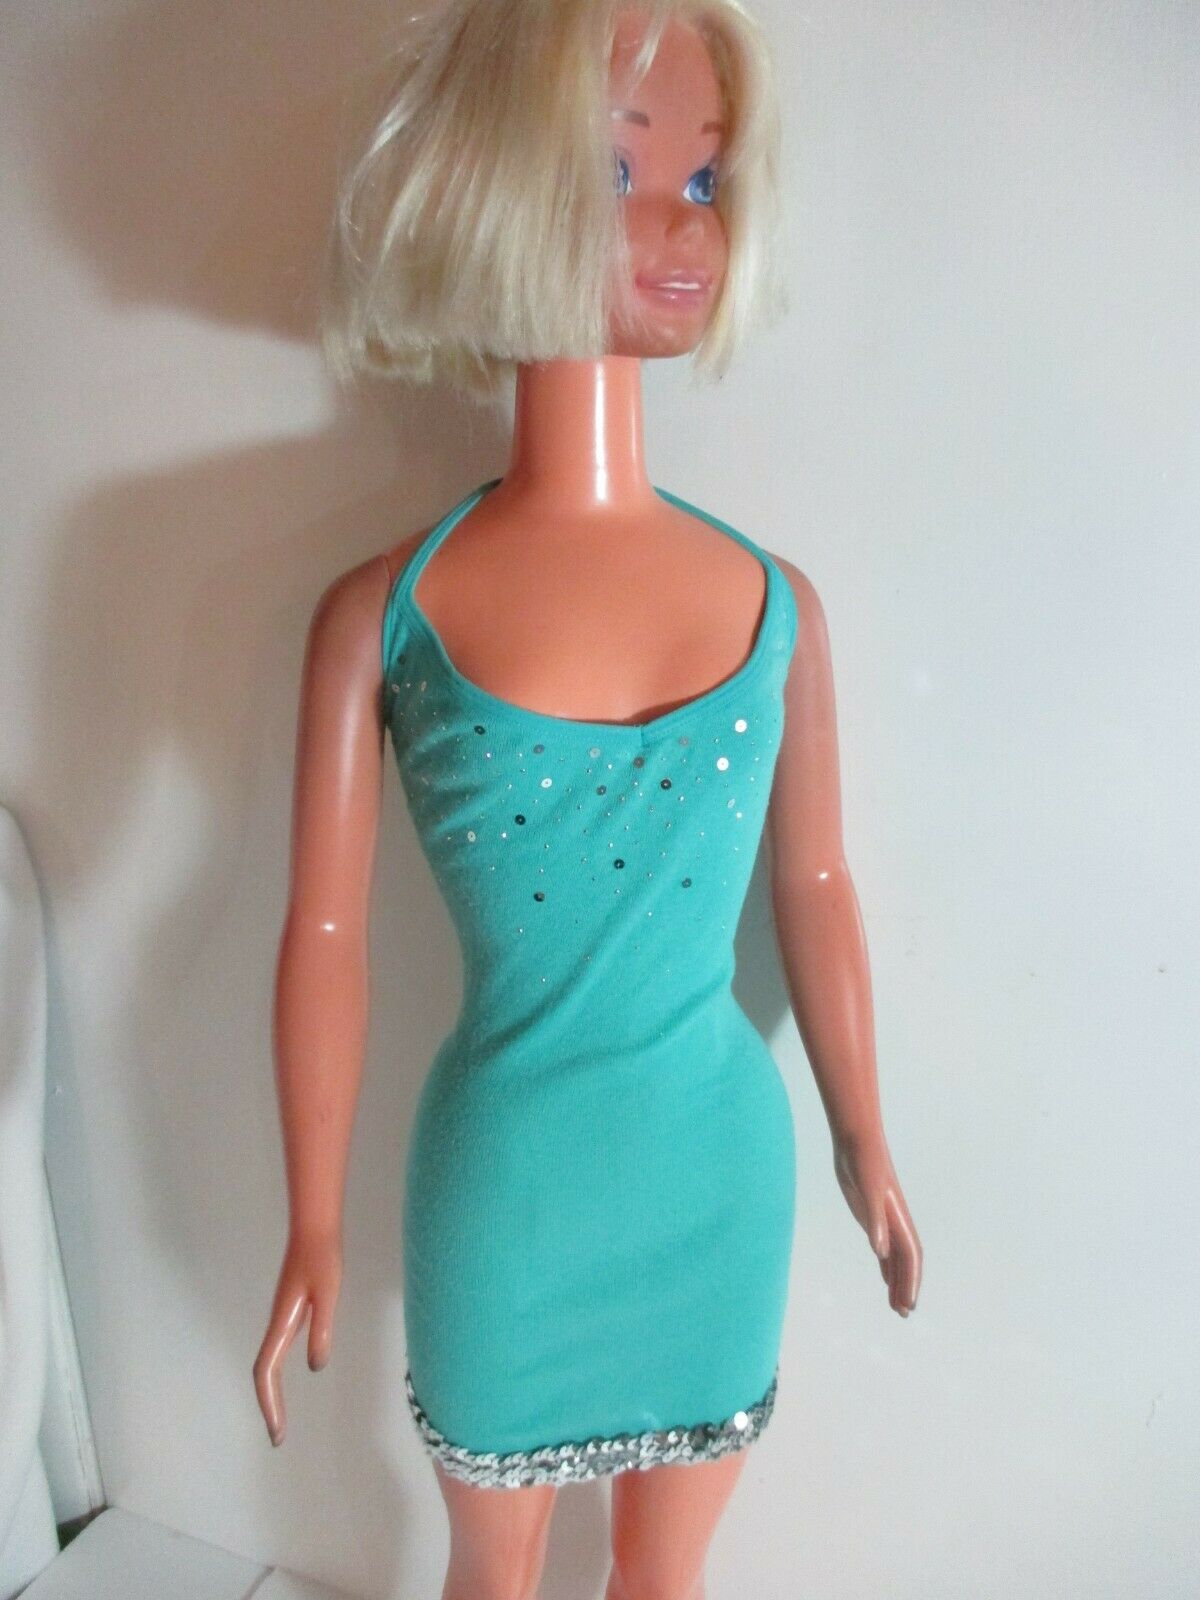 My Size Barbie 36" Doll Dress Aqua Blue With Silver Sequins Form Fitting Clothes